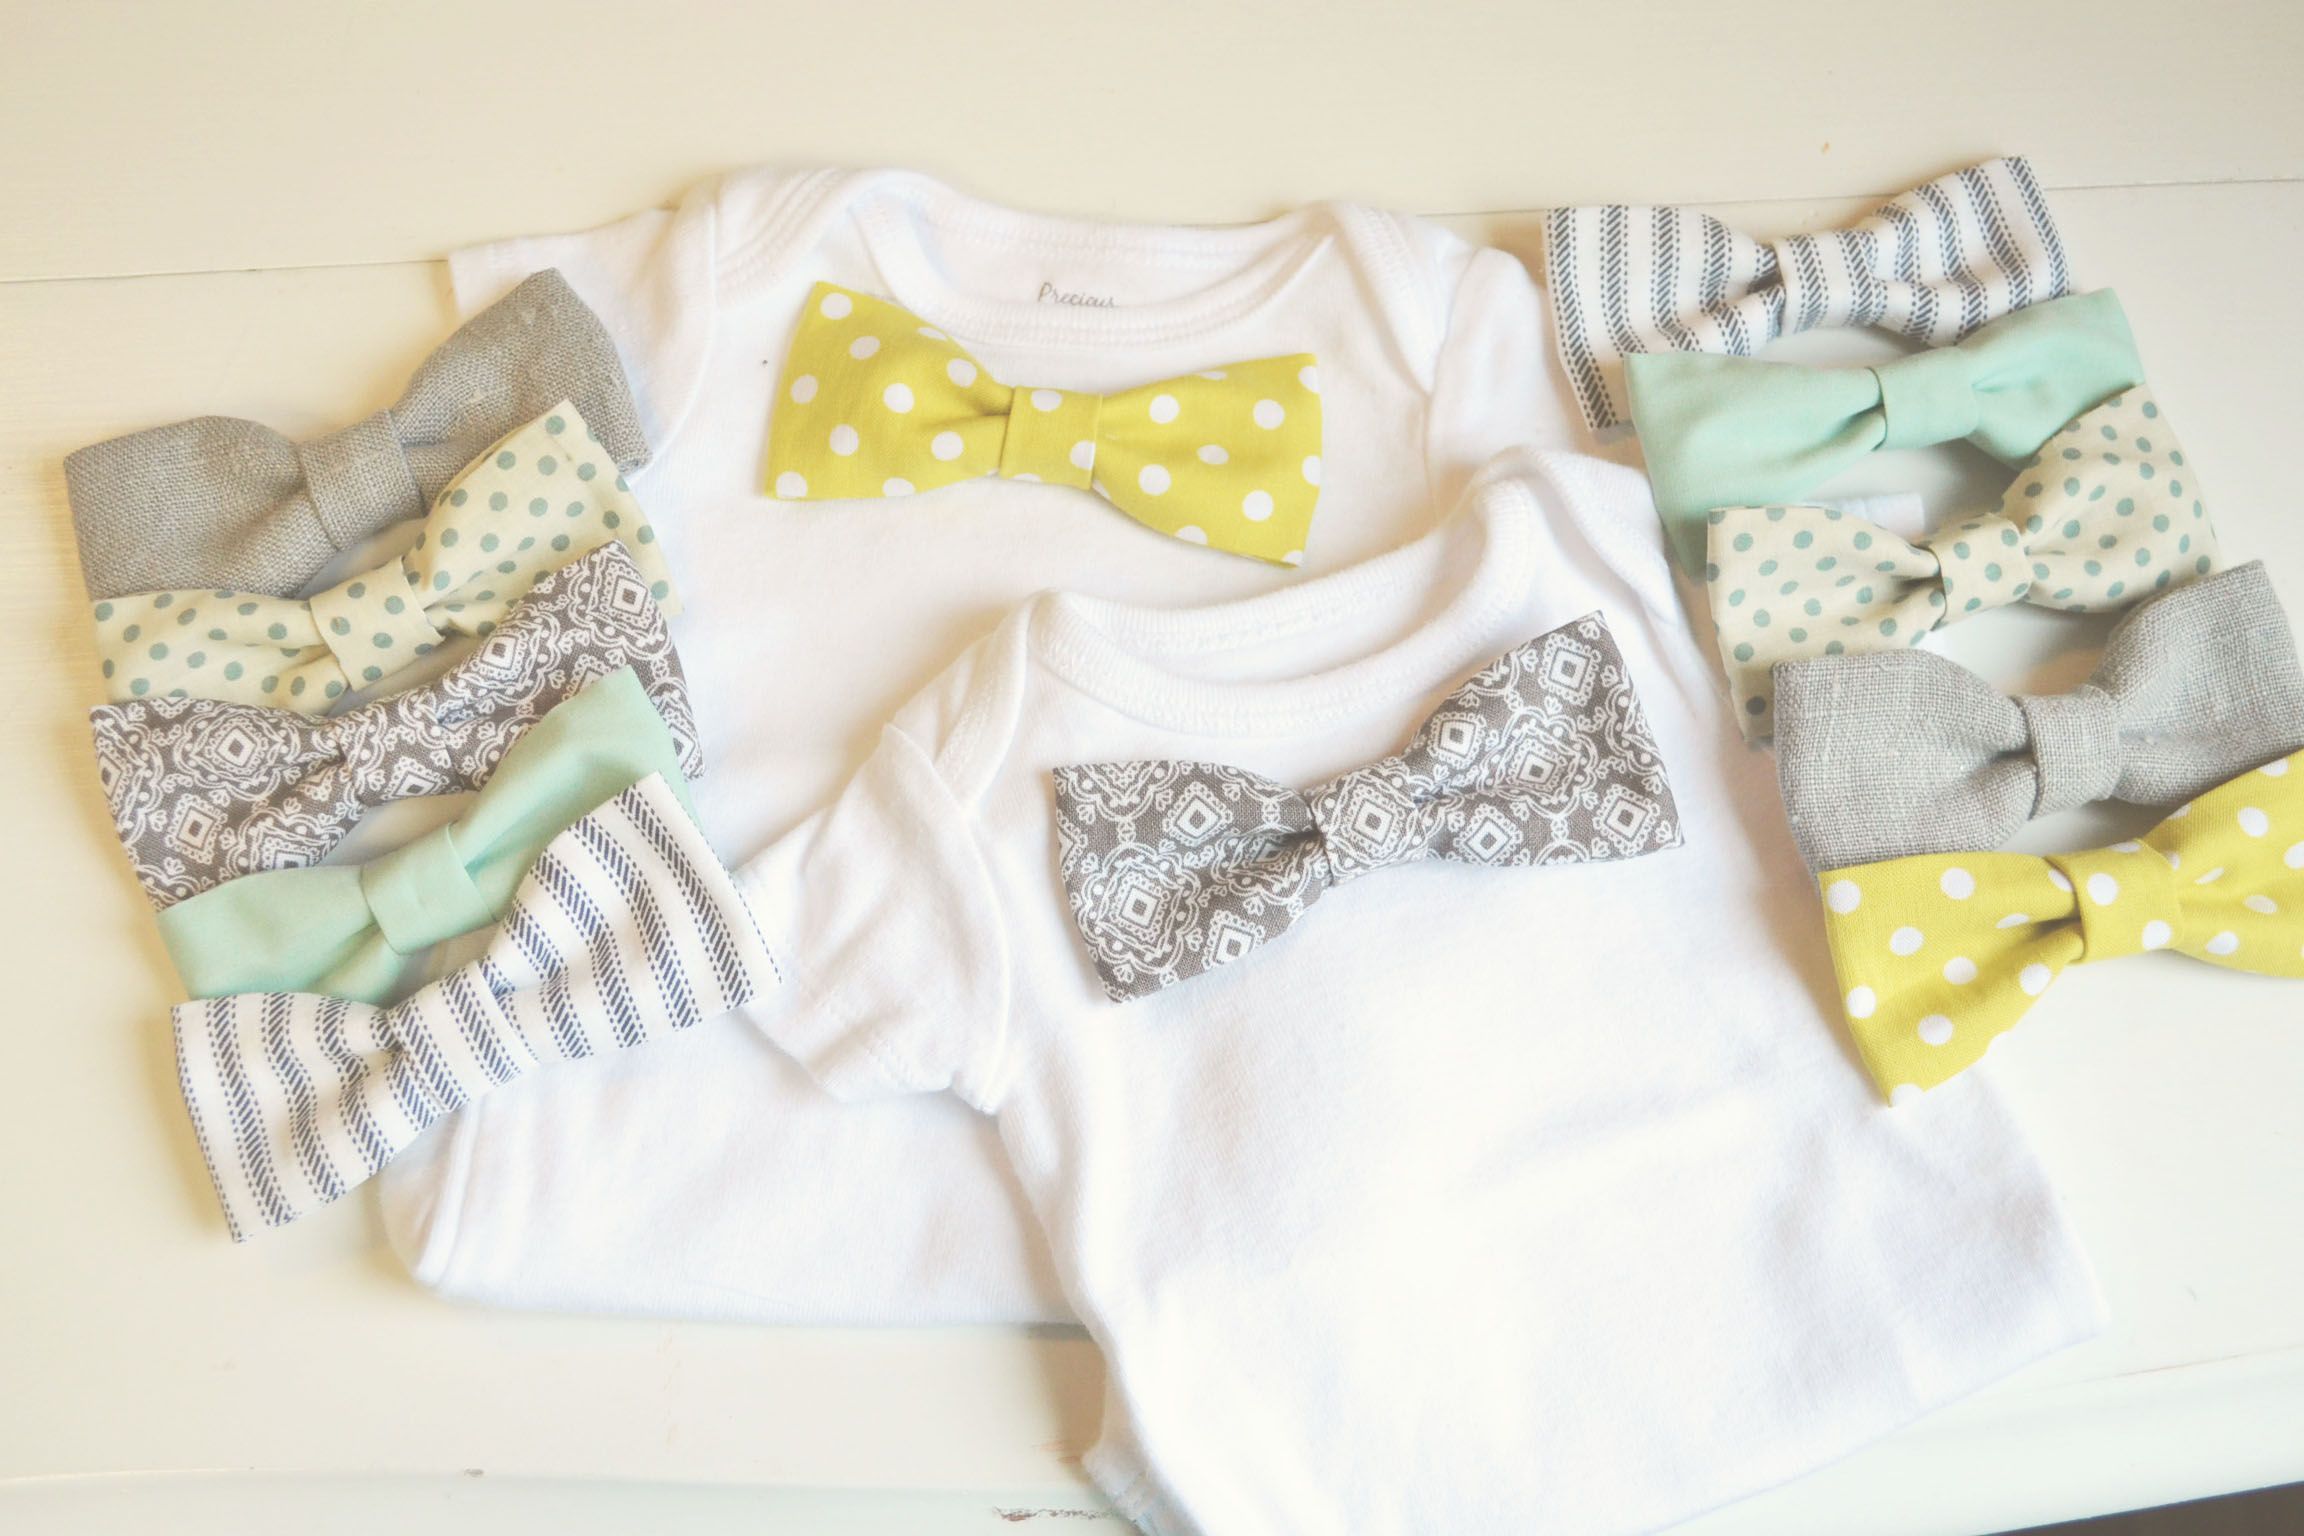 diy tutorial for baby boy onsies with interchangeable bow ties!